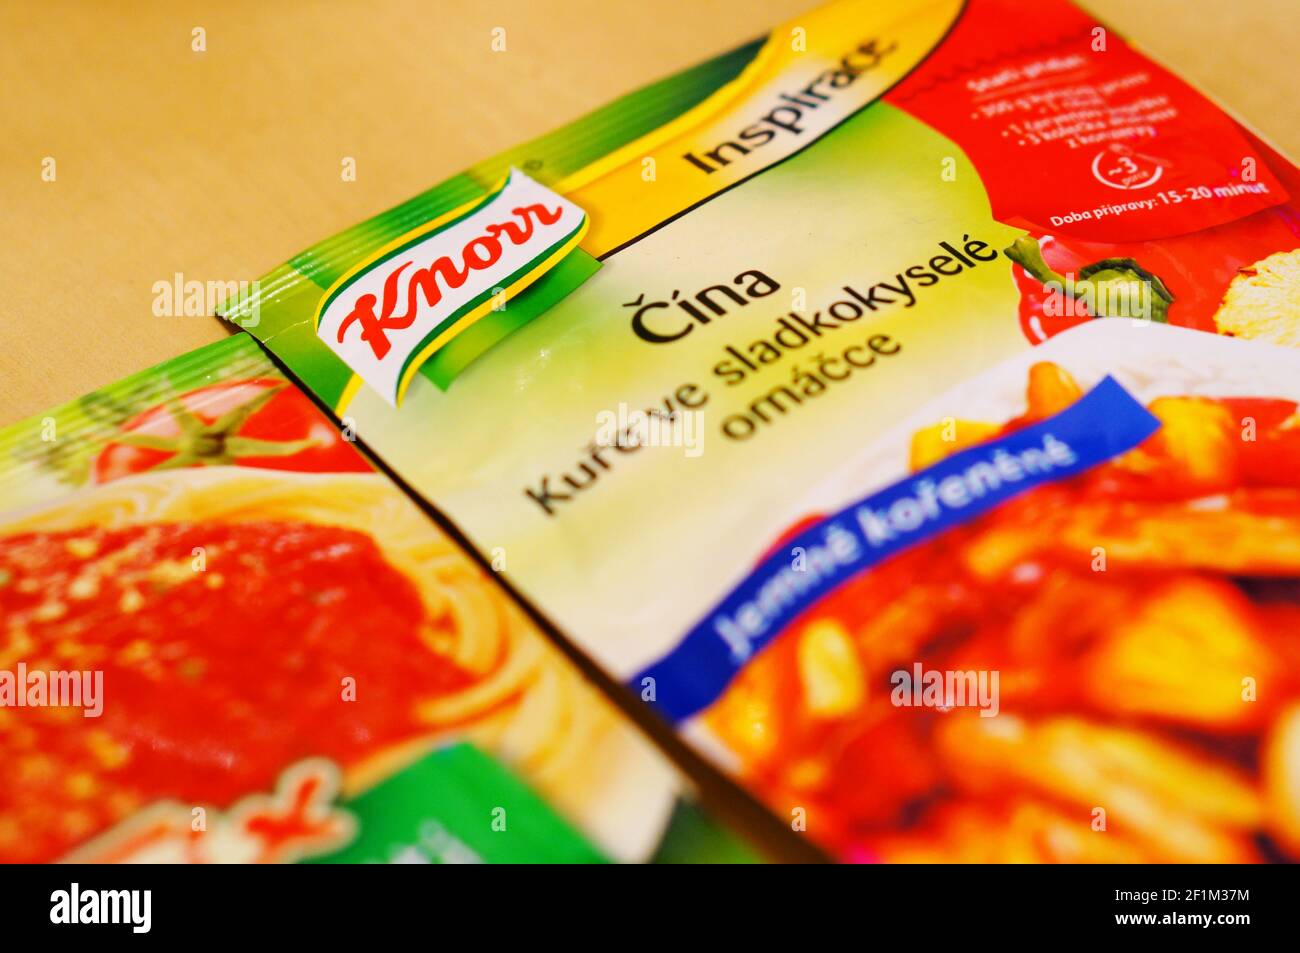 bags 2014: in Alamy 03, dishes different - Knorr fix POZNAN, - for POLAND Stock Photo Feb